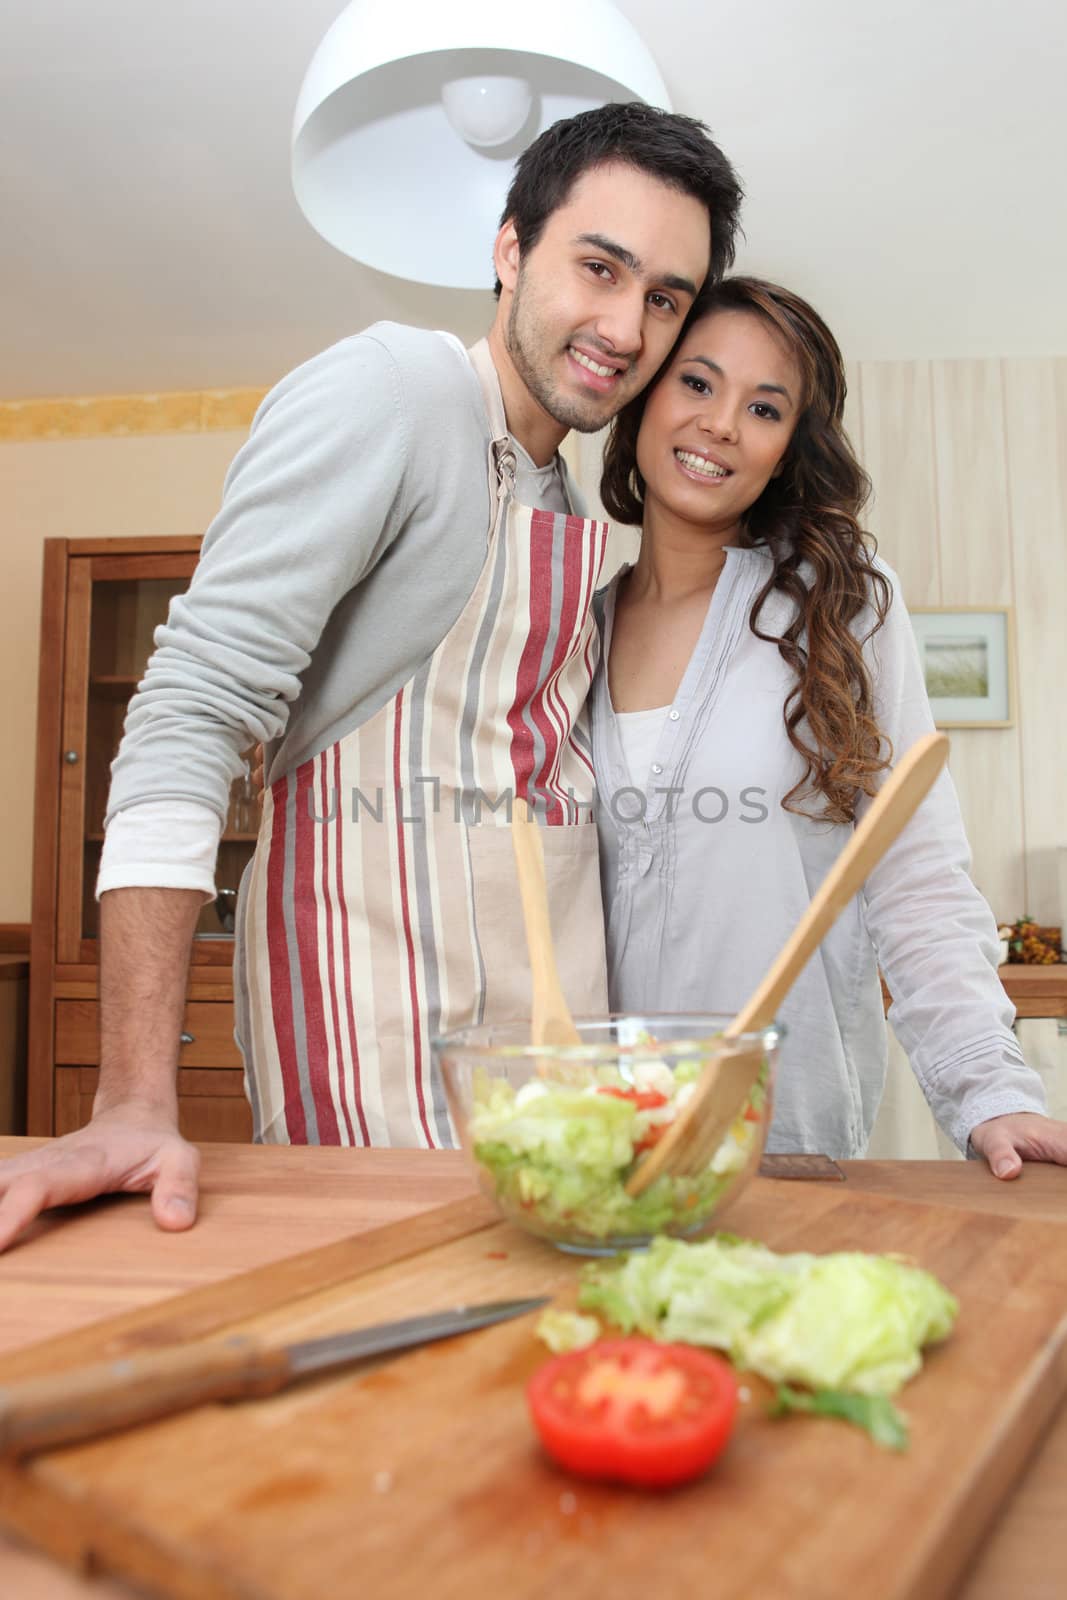 Couple making a salad in the kitchen by phovoir